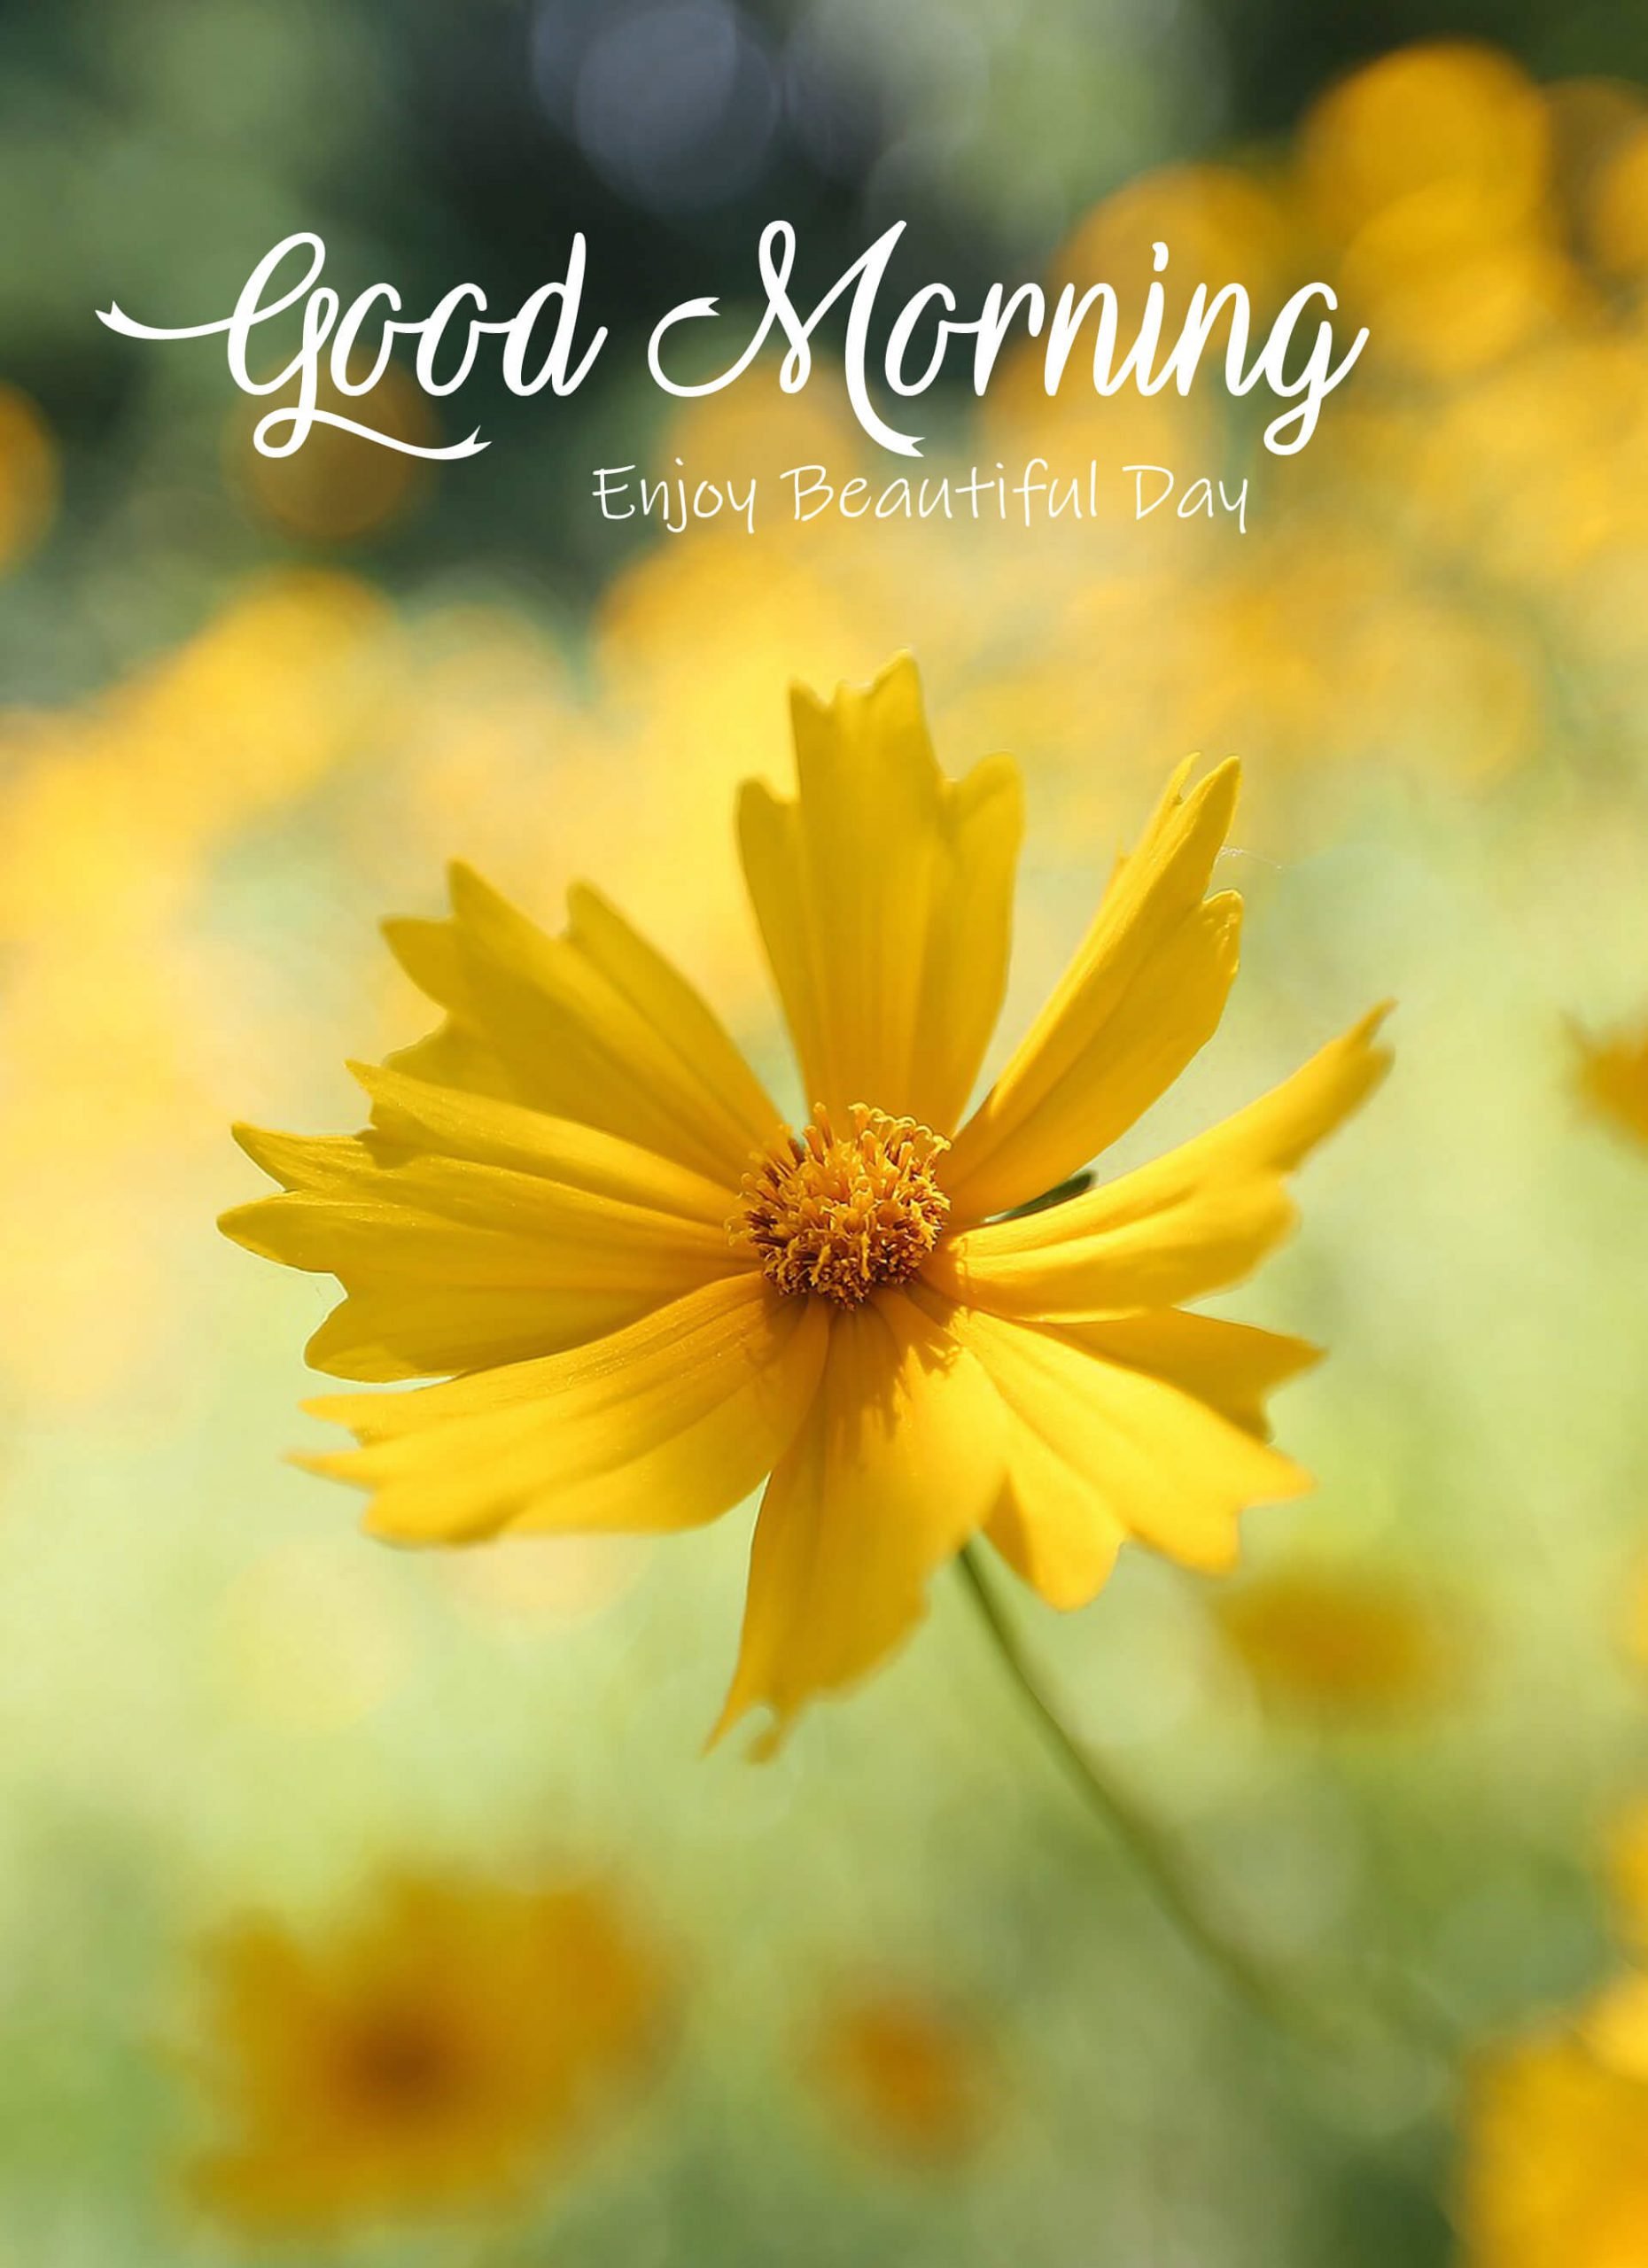 Best Good Morning Pictures & Wishes for Social Media Sharing